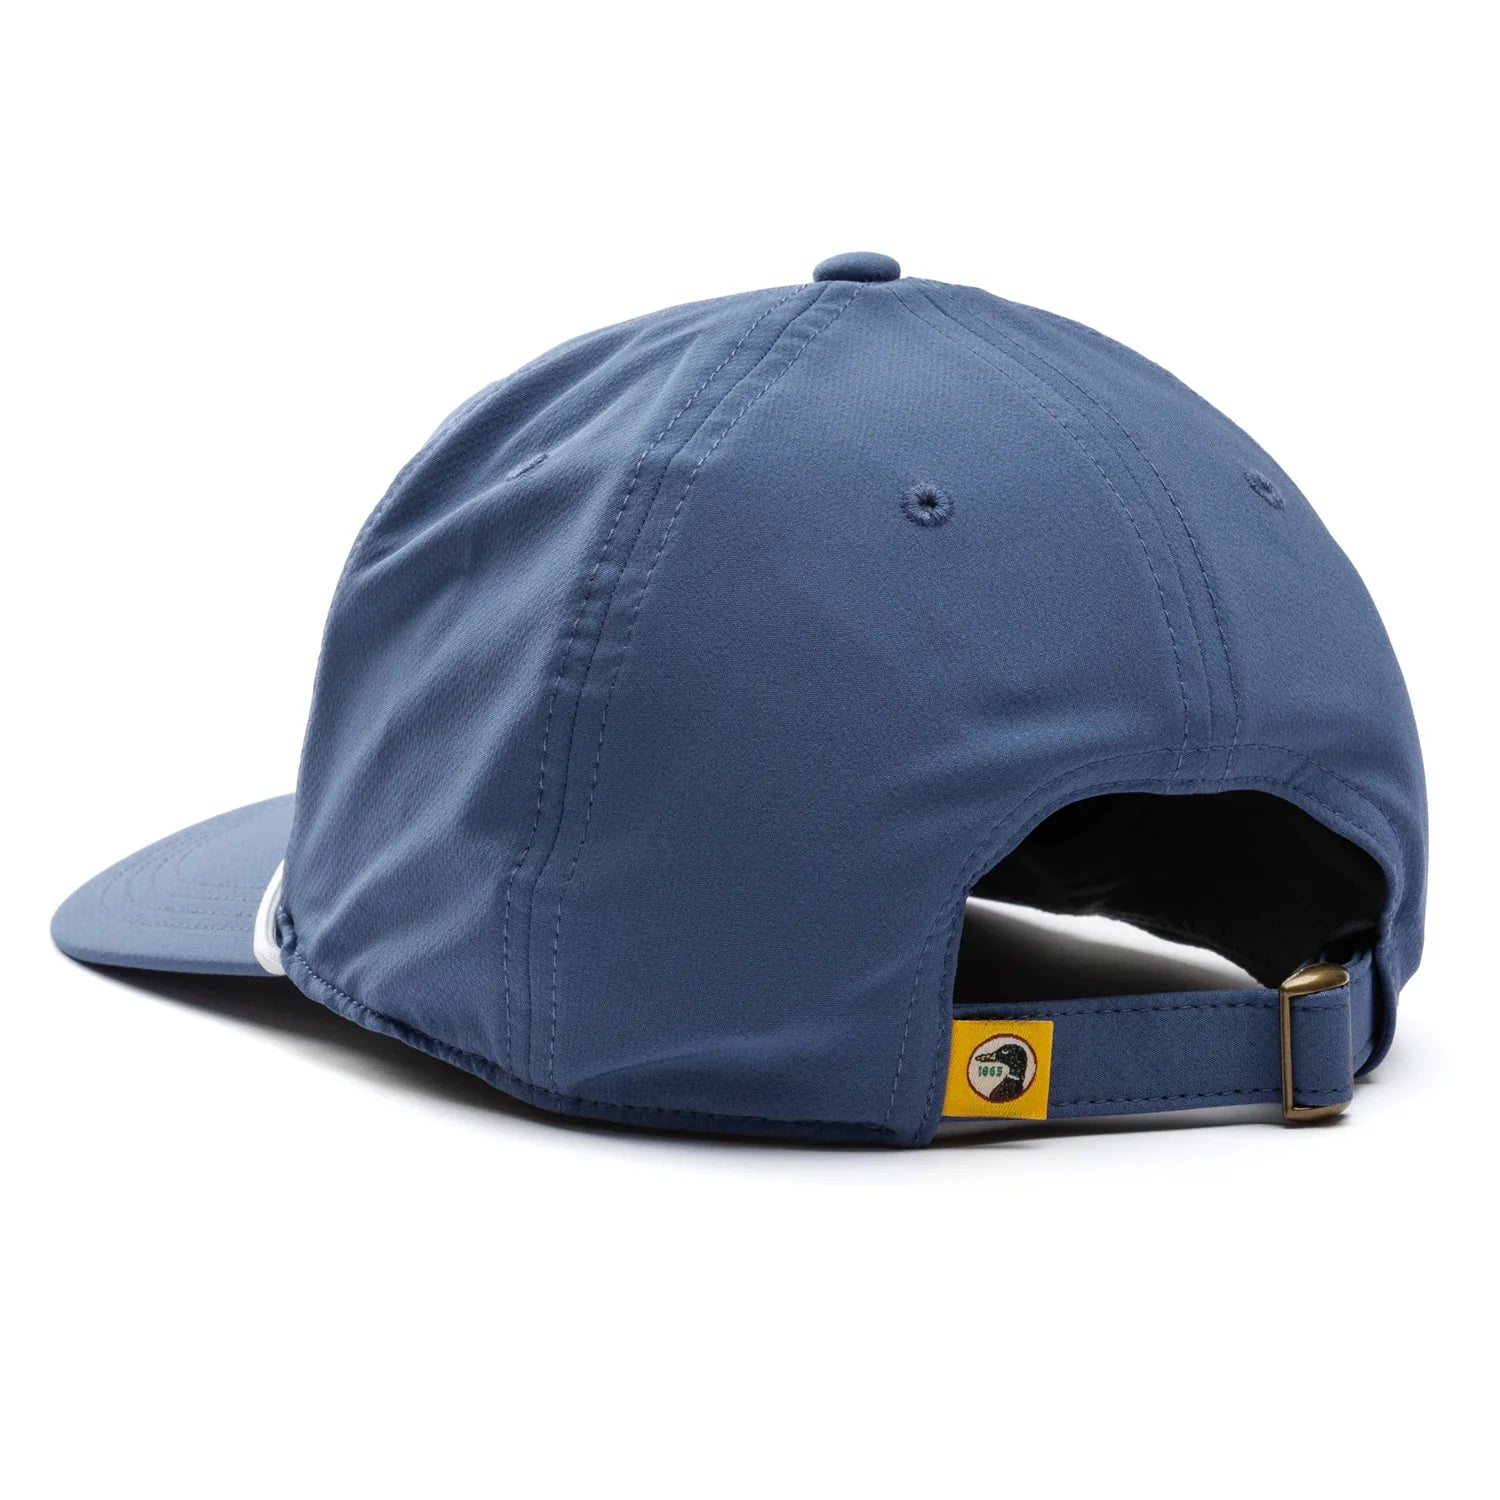 Duck Head Performance 5-Panel Unstructured Hat - Mineral